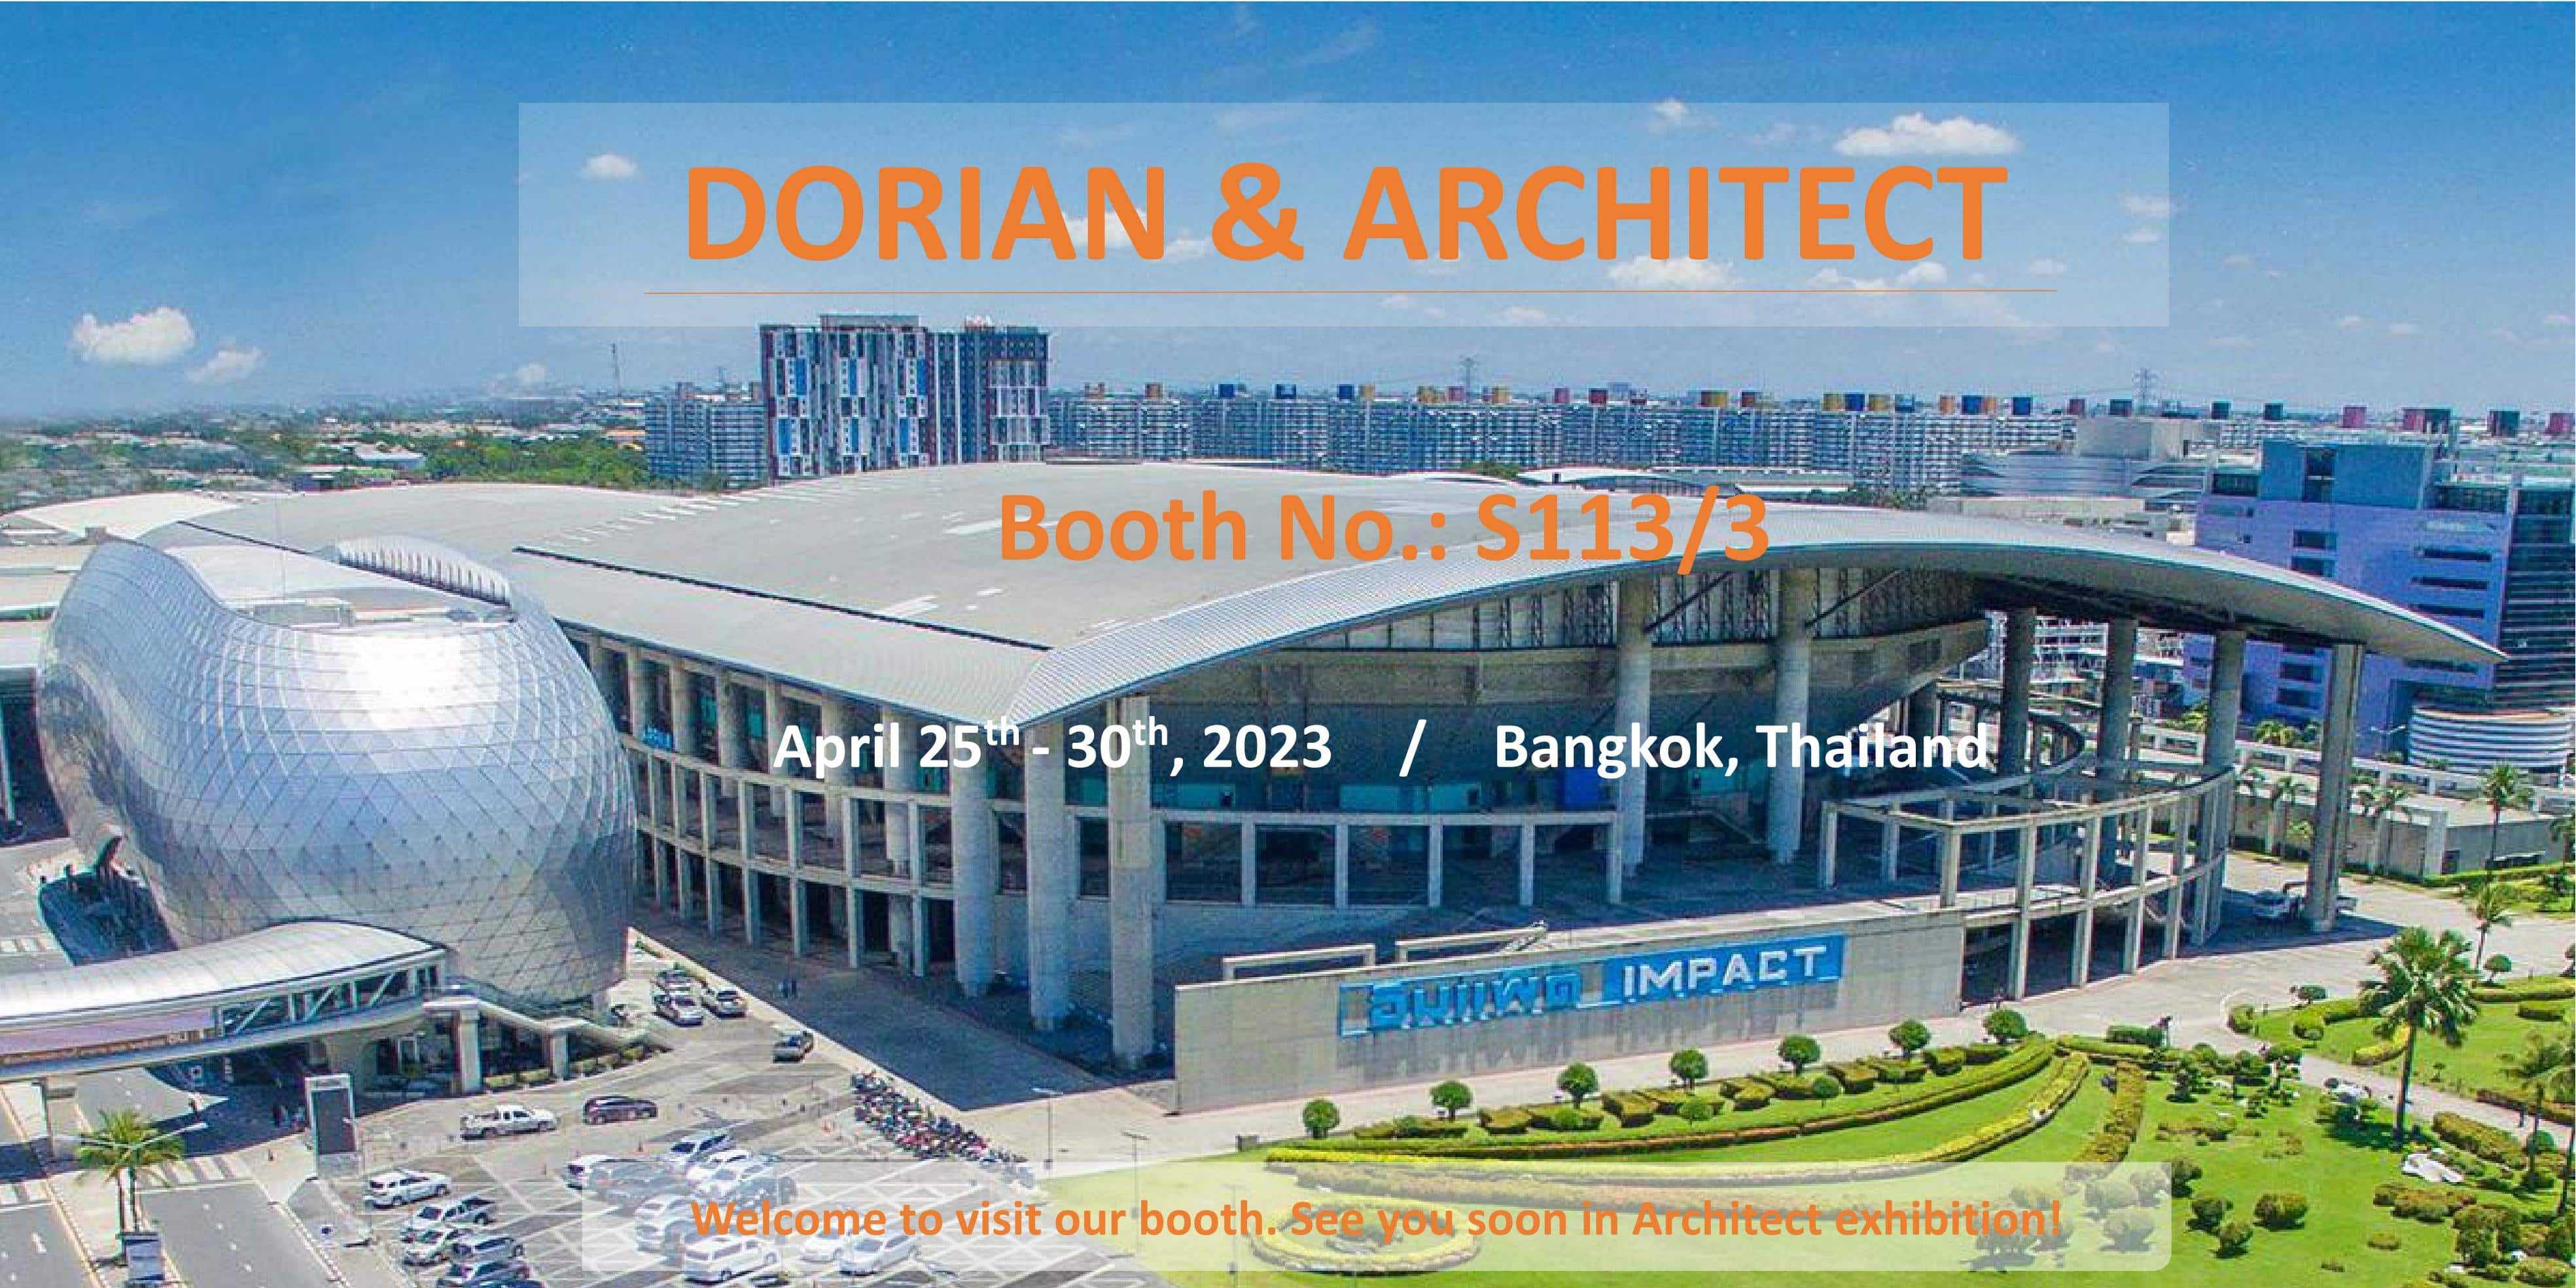 Dorian-team-will-attend-the-35th-ARCHITECT-exhibition-in-Bangkok-Thailand-2-2